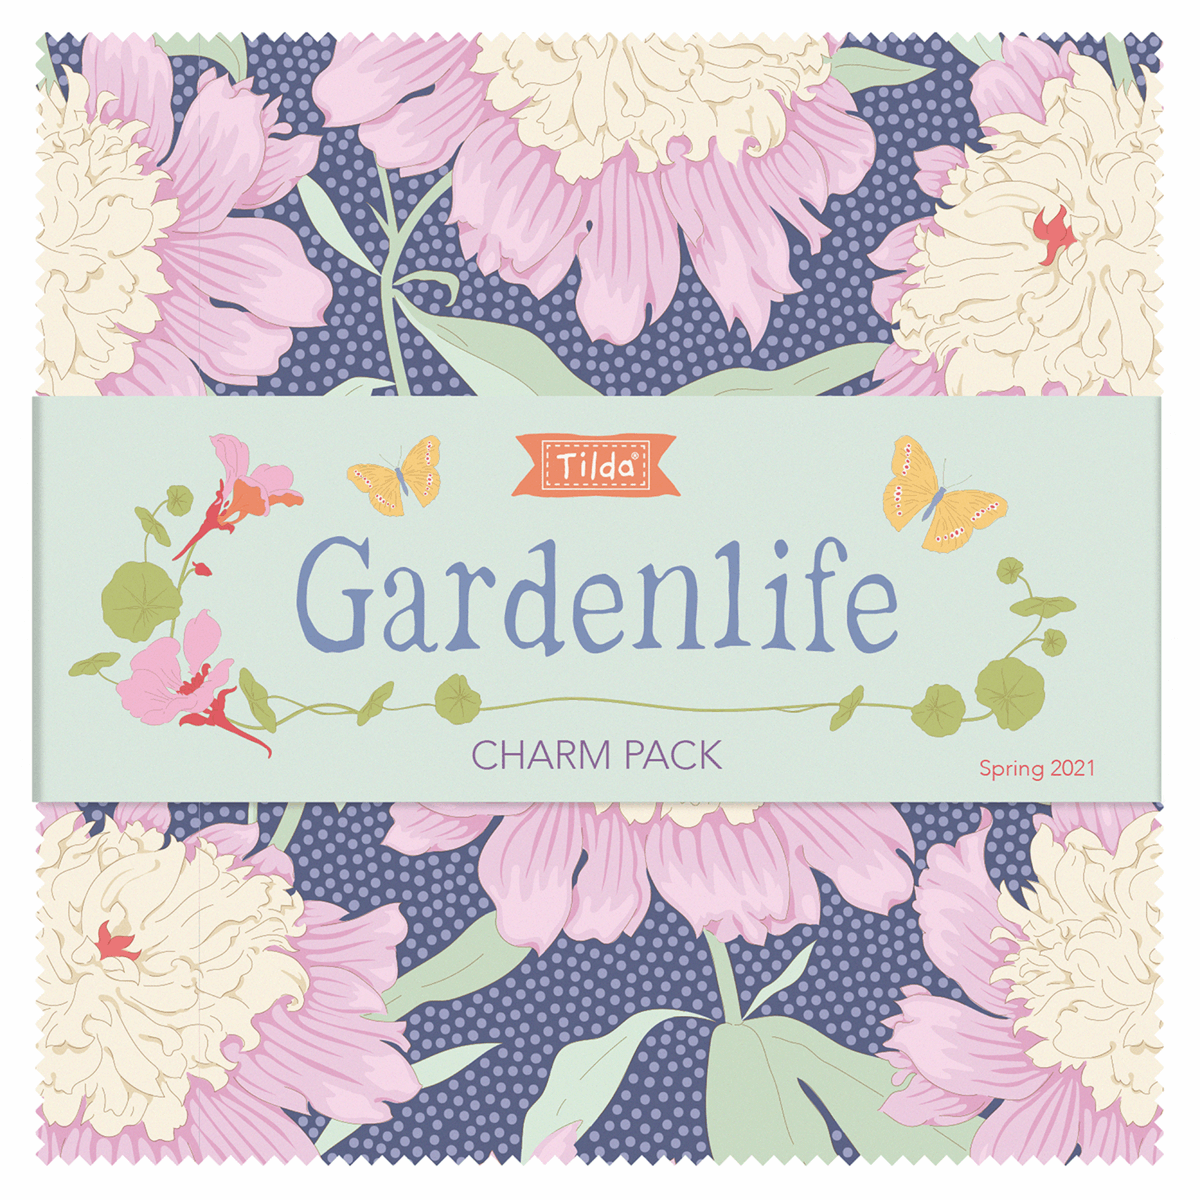 Tilda Gardenlife Charm Pack - 12.5 / 5in squares - 40 Pieces (20 designs)